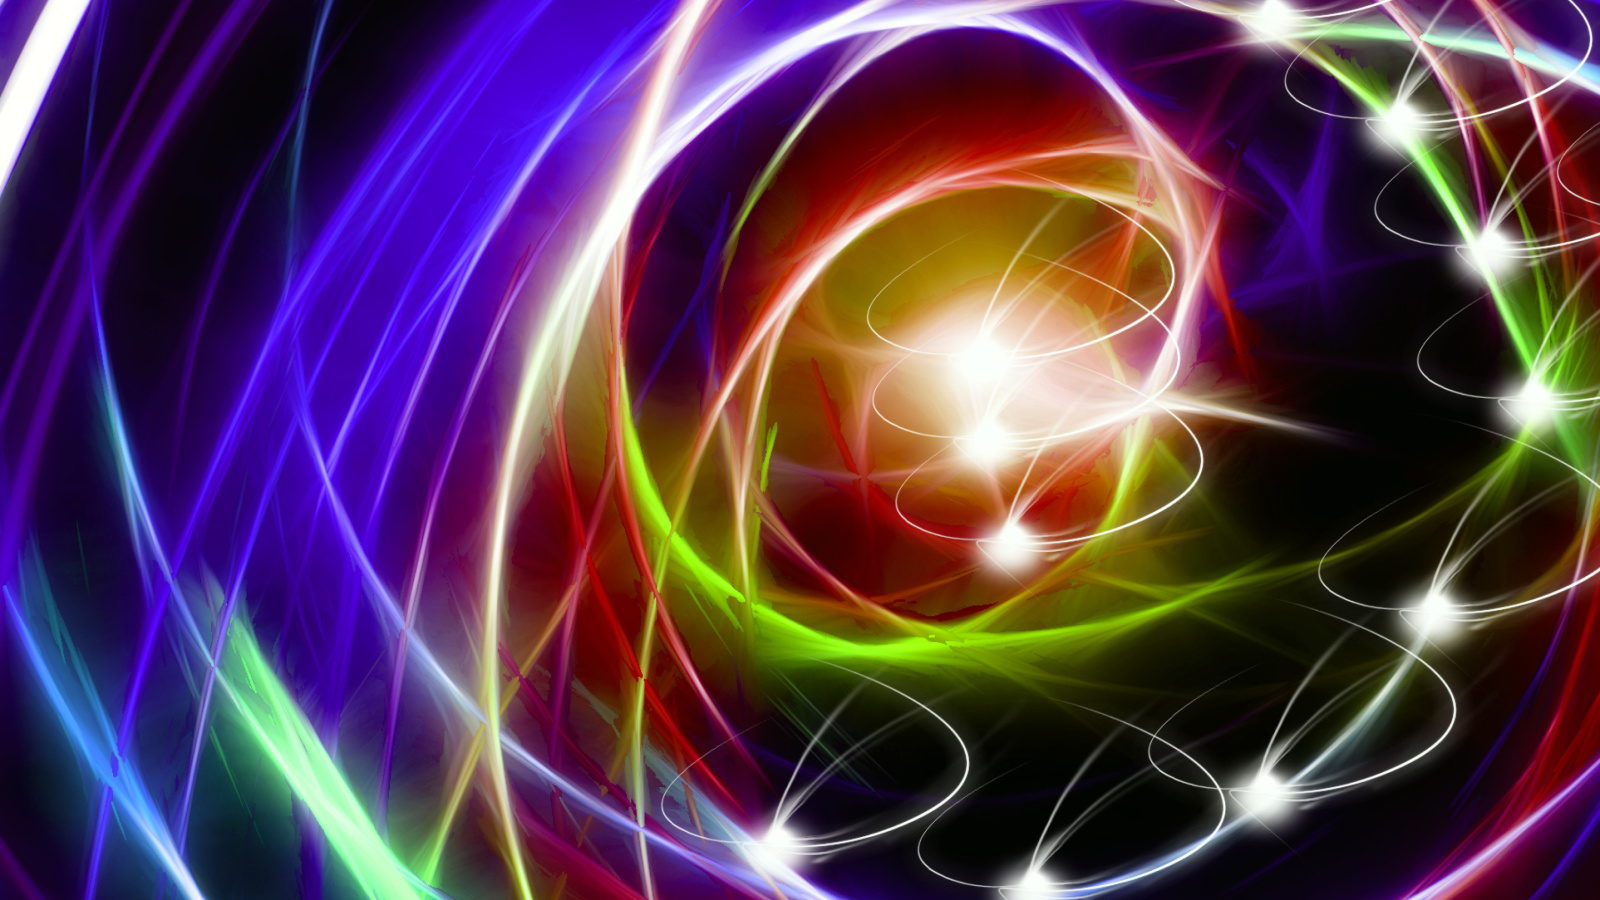 Abstraction chaos Rays wallpaper 1600x900